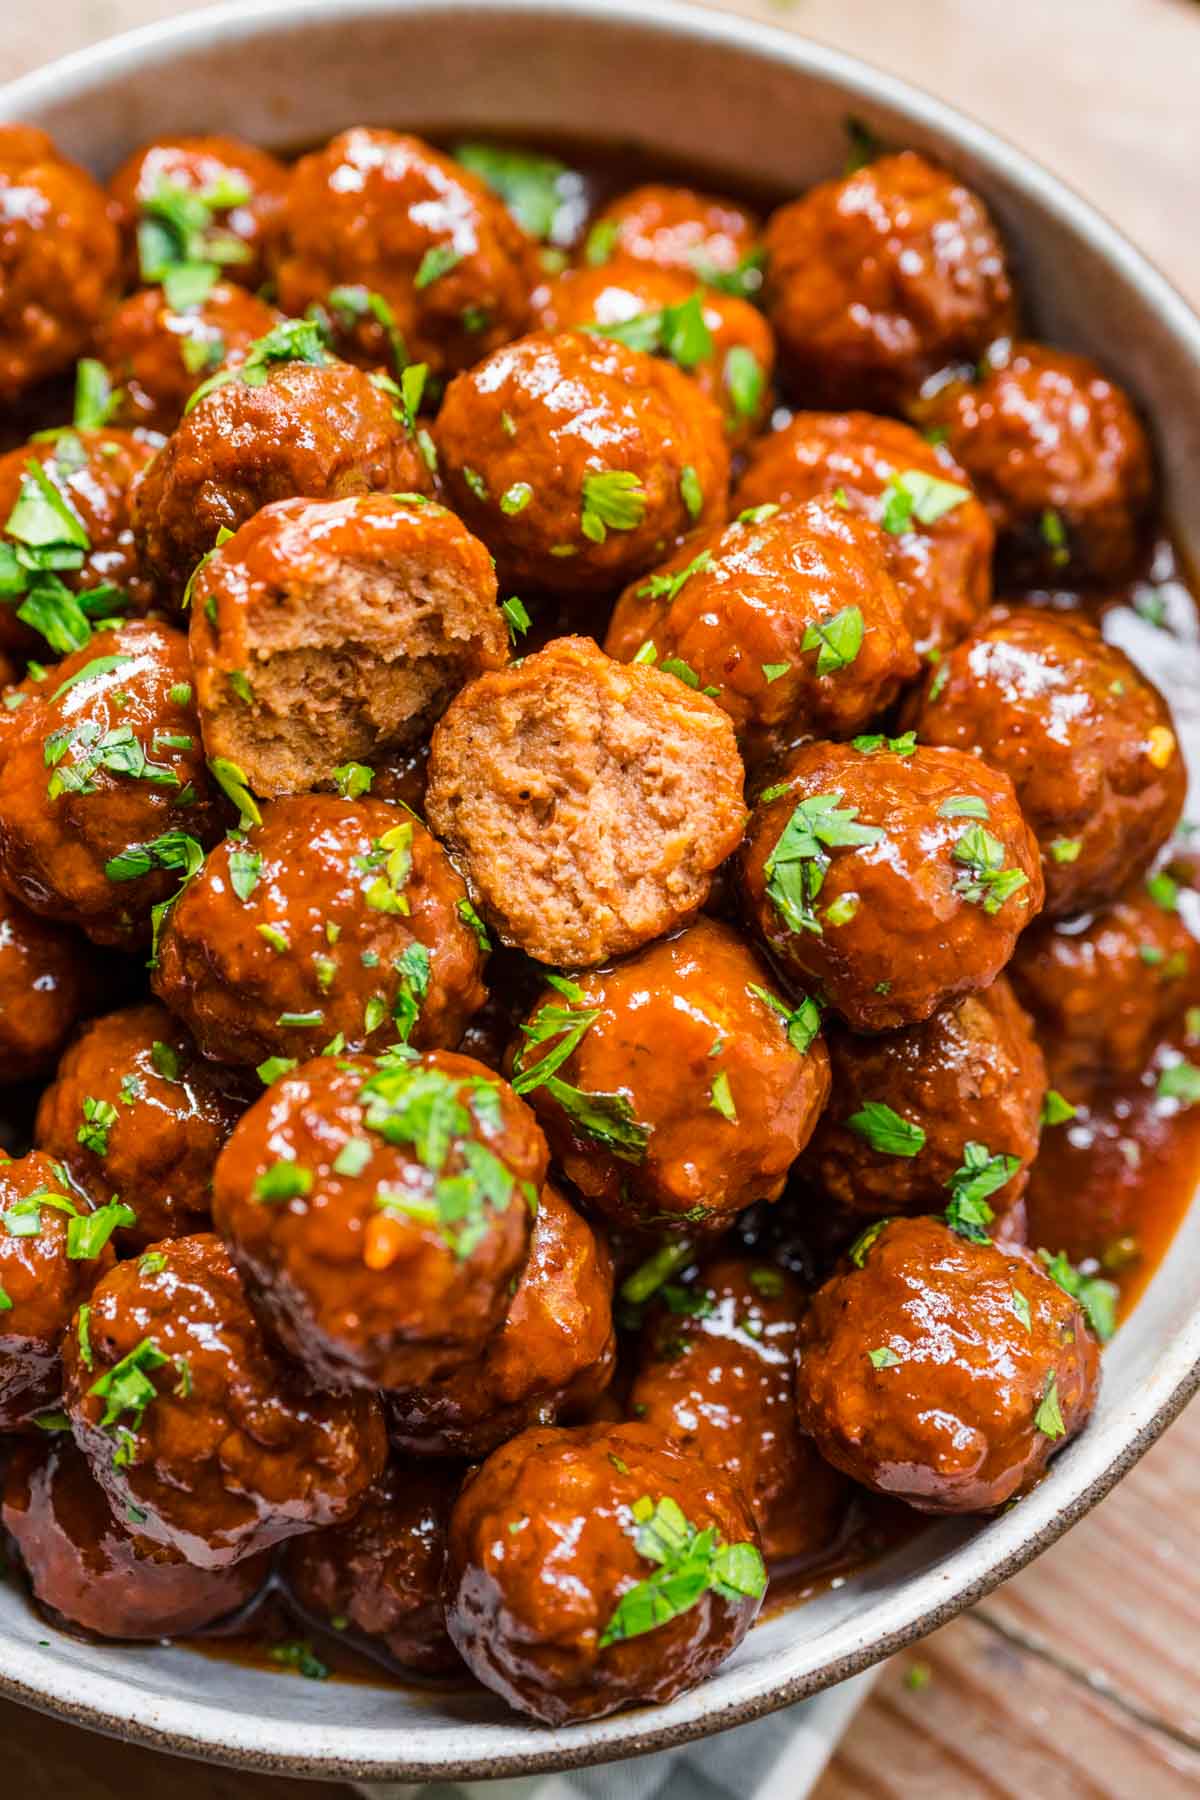 Marmalade Meatballs in serving bowl